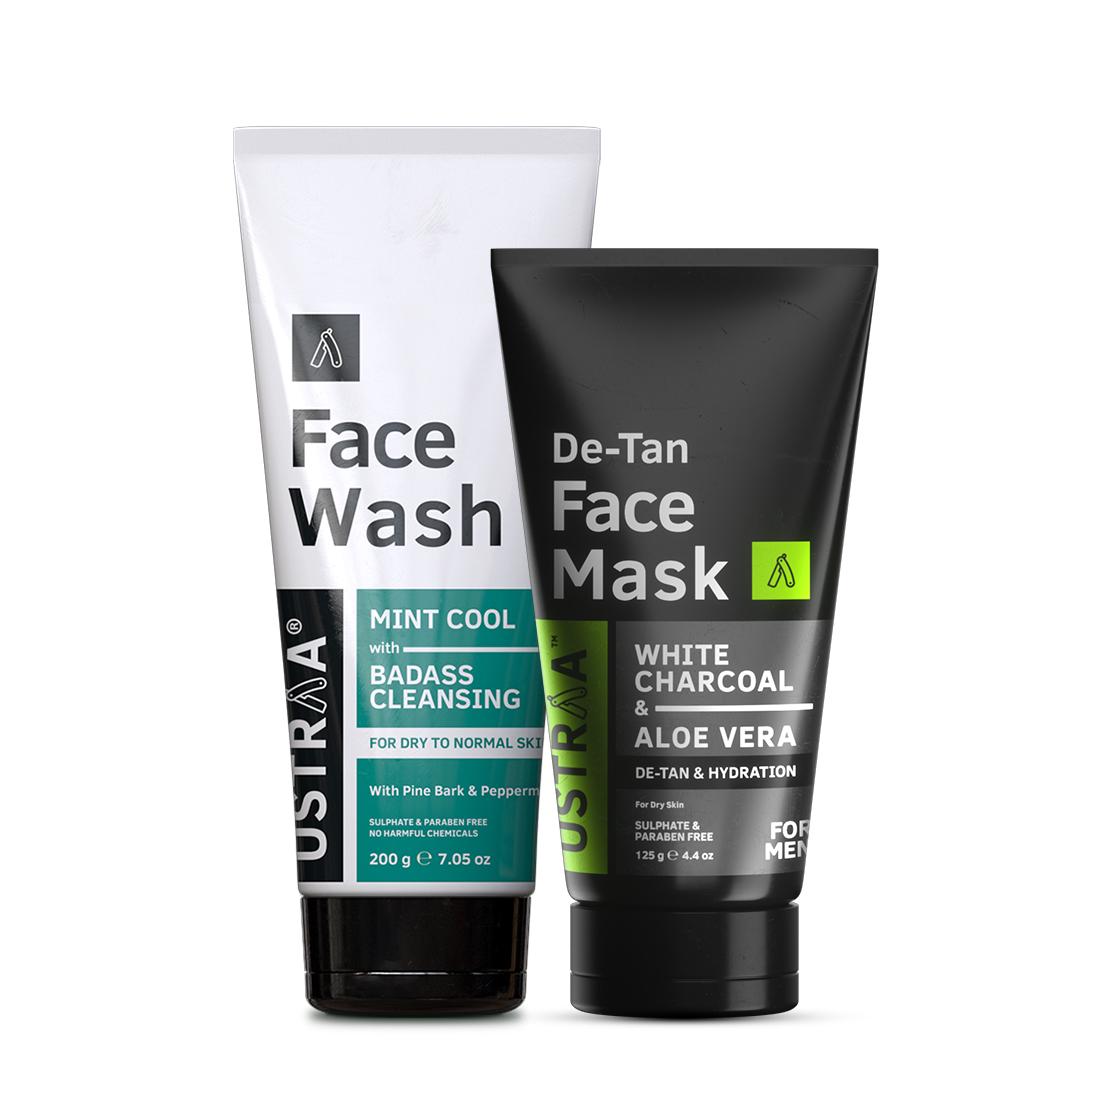 Face Wash Dry Skin & Face Mask Dry Skin